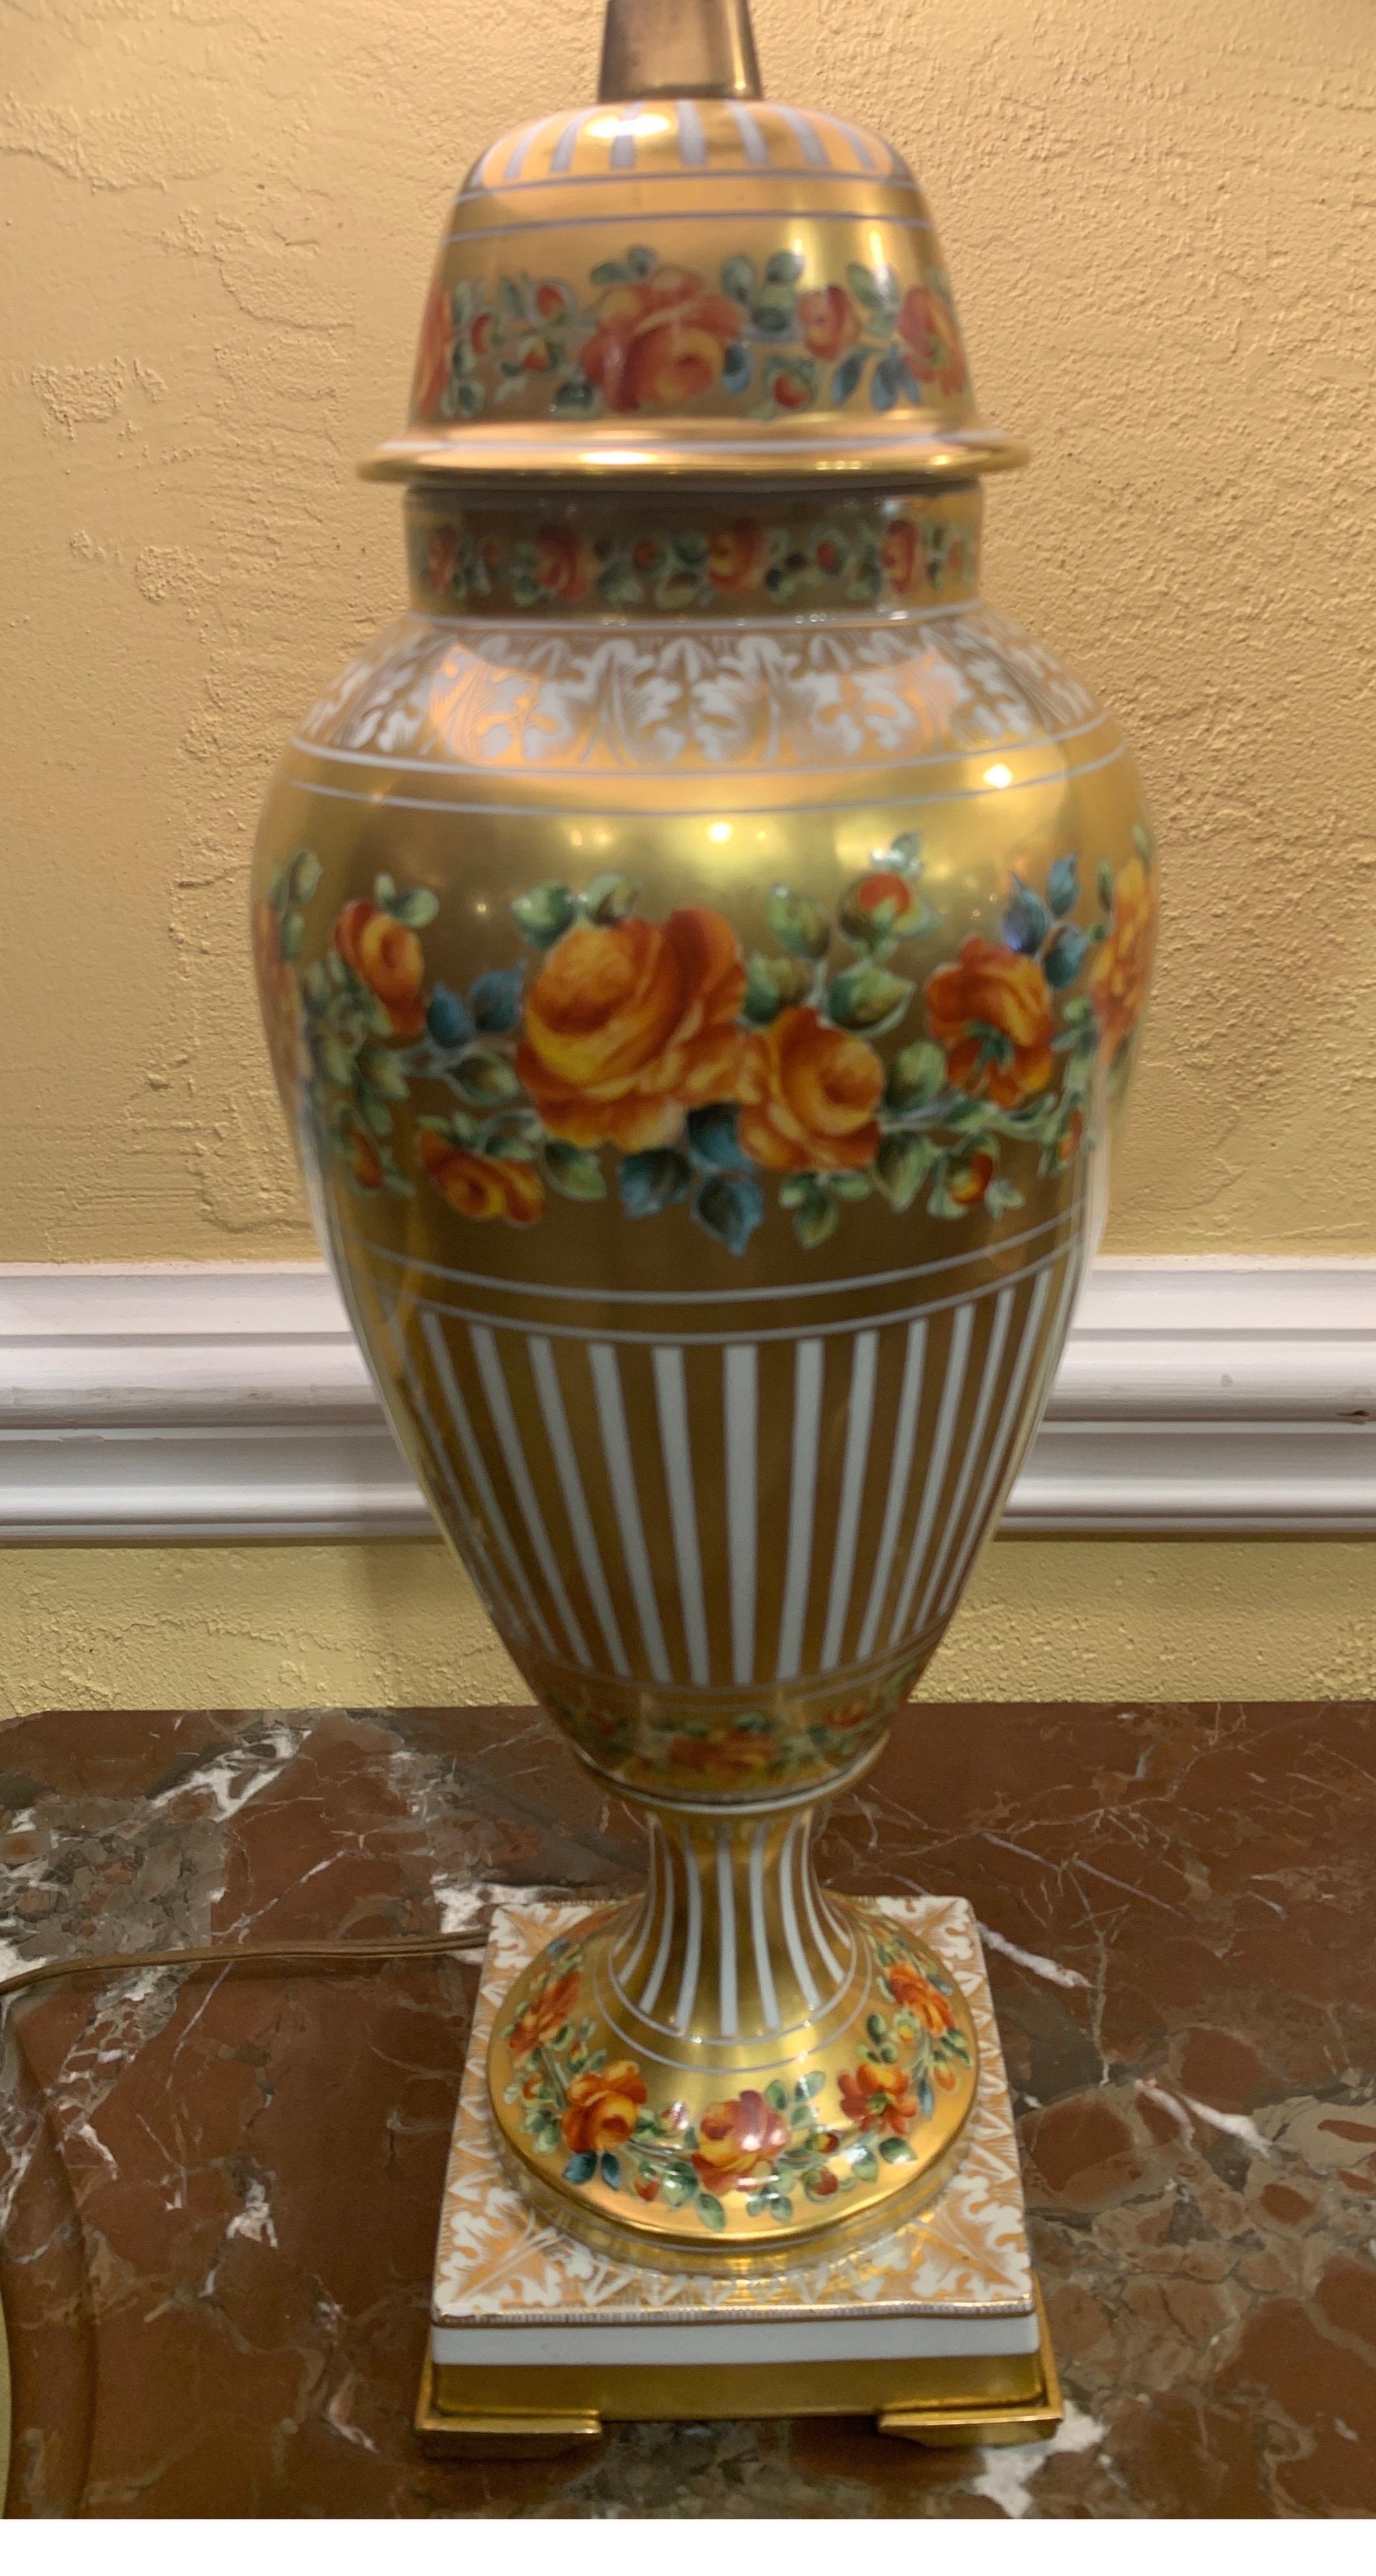 Pair of French porcelain urns converted into lamps by Marbro of California. Floral decorated scenes. Bases are accented with bronze feet.